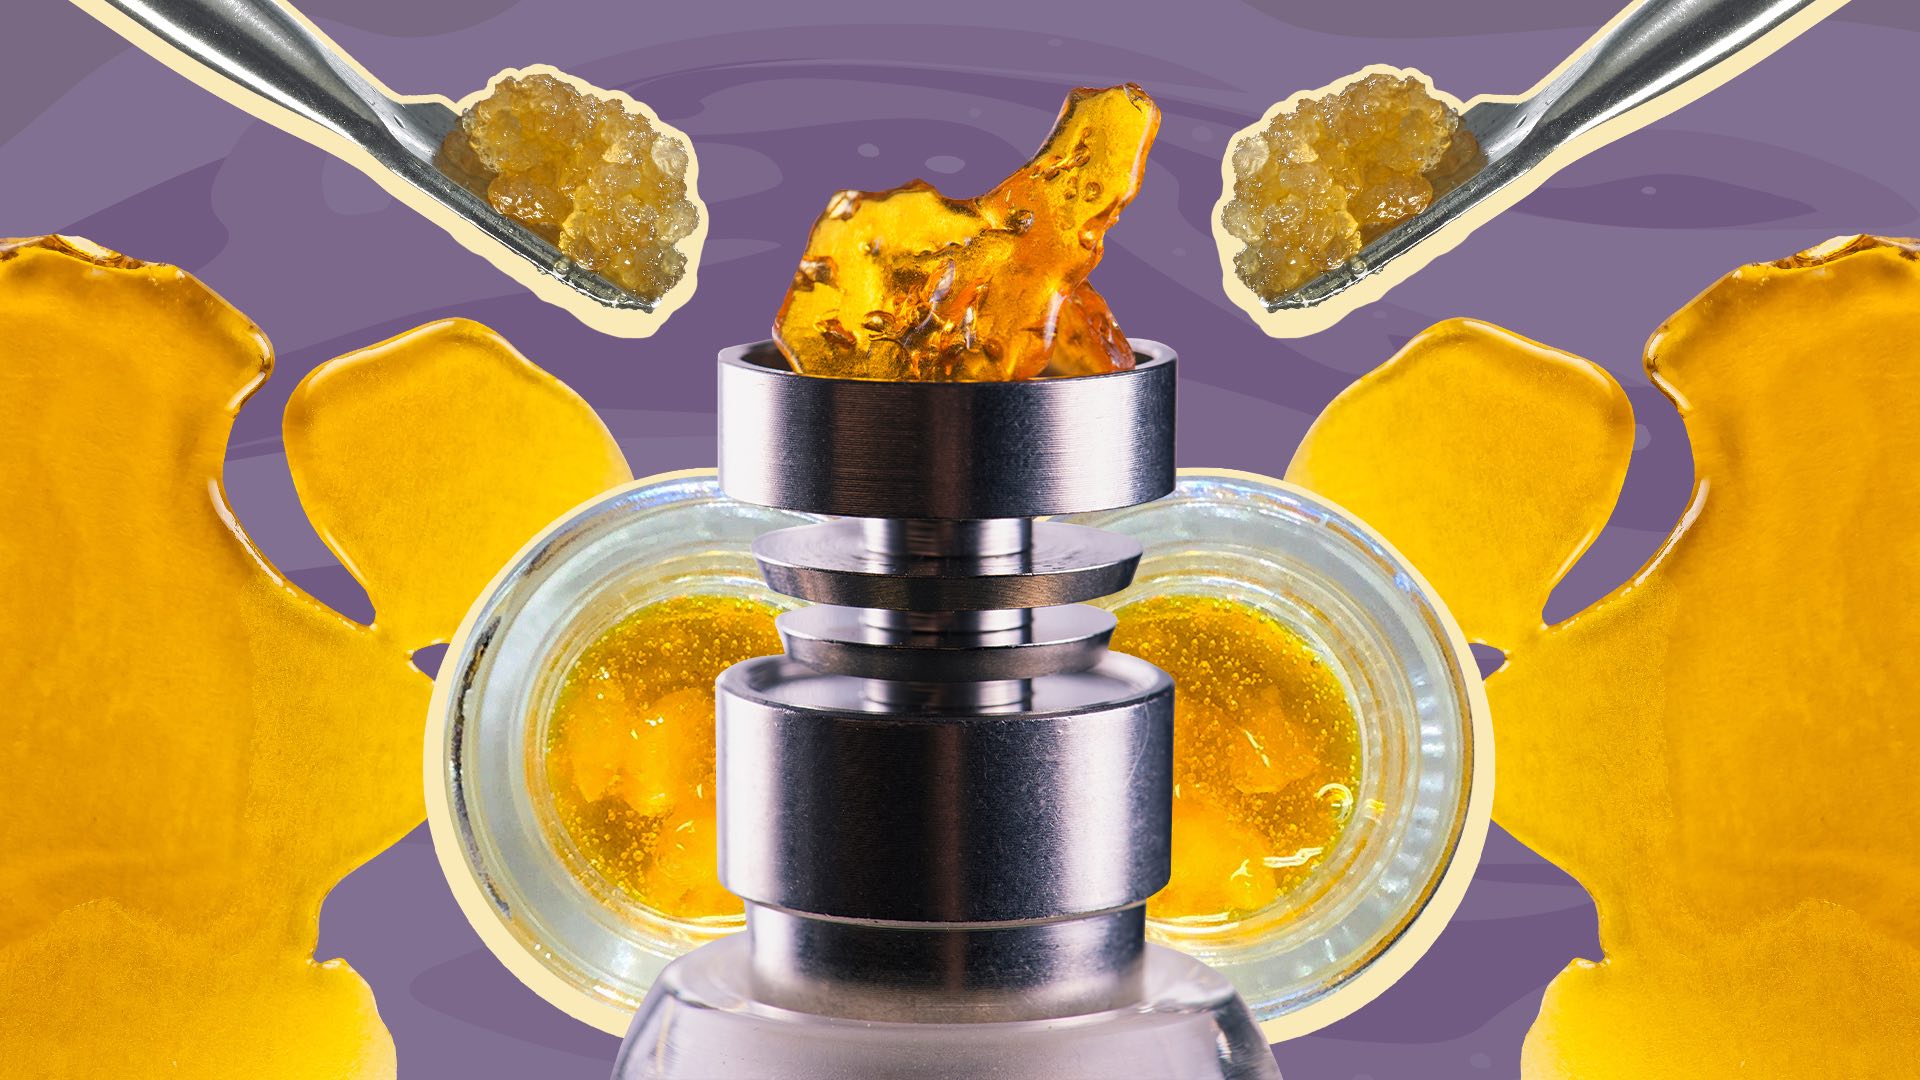 Dab Tool 101: What You Need to Know